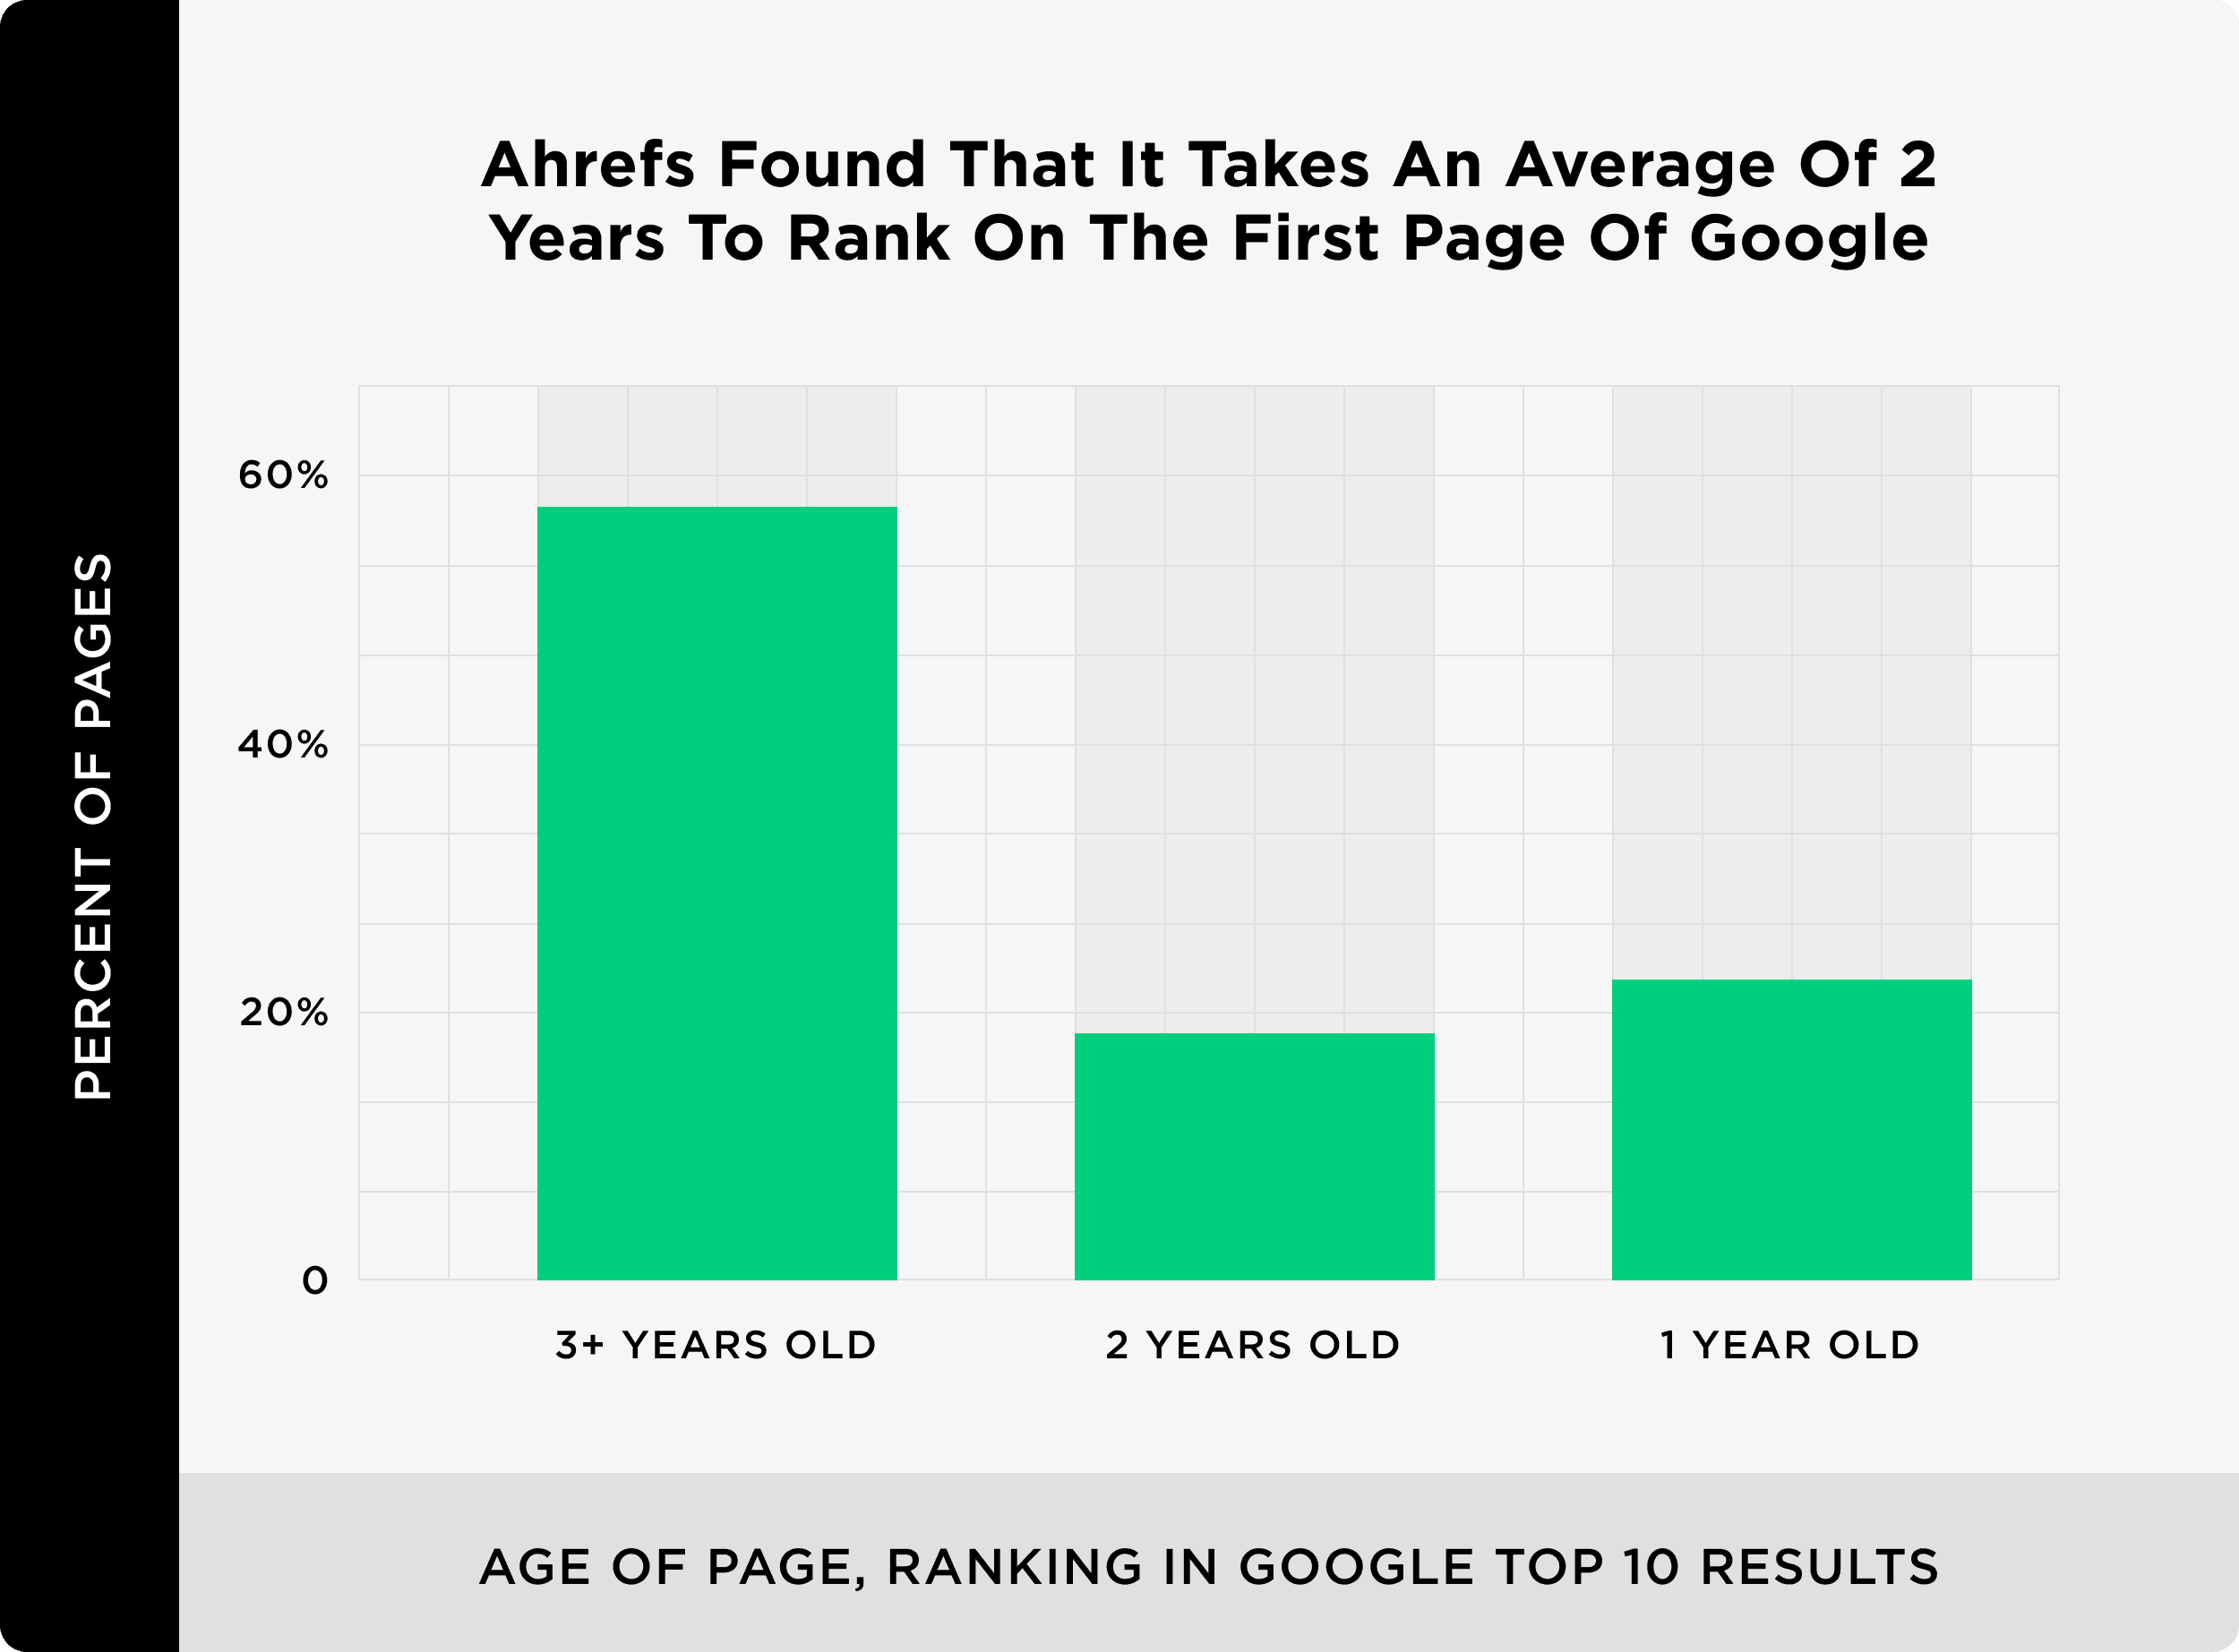 ahrefs found that it takes an average of 2 years to rank on the first page of google